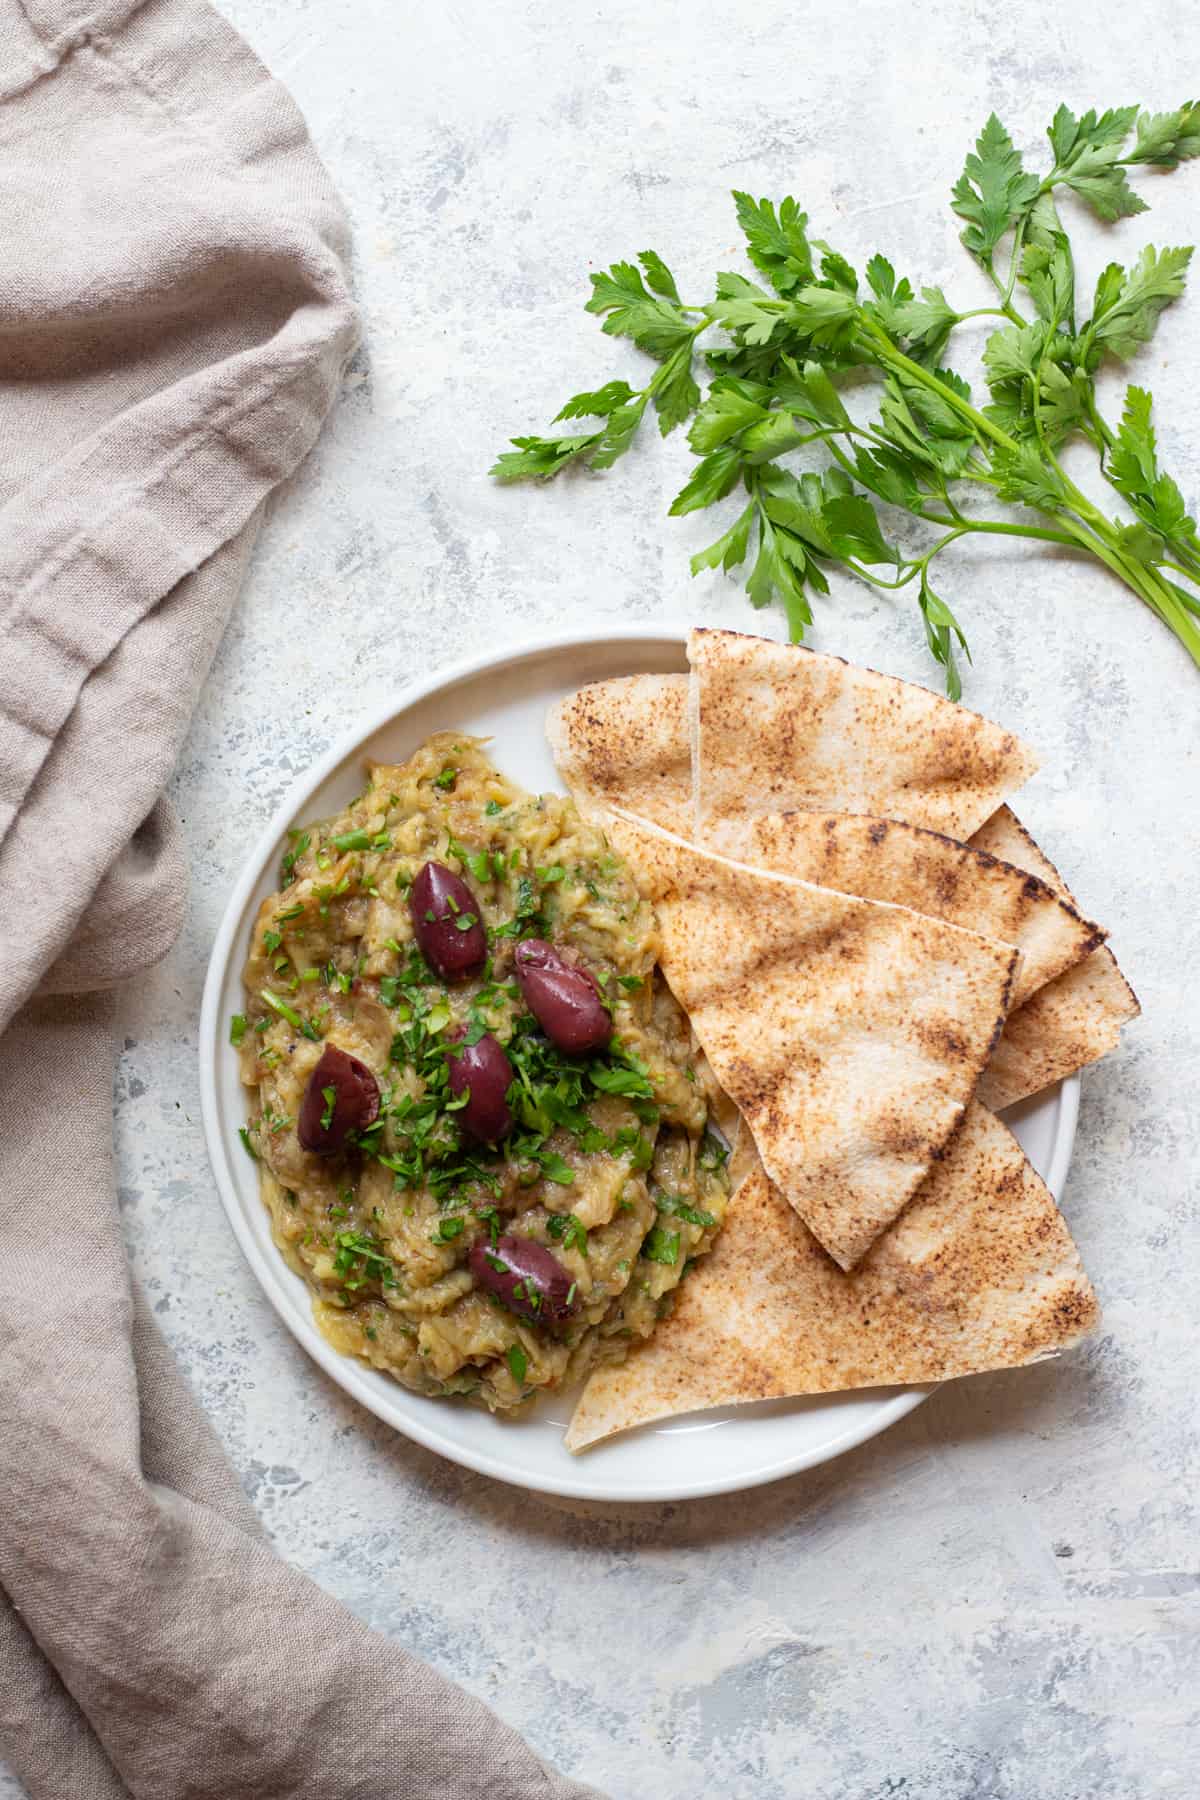 Melitzanosalata is a Greek eggplant dip that's made with eggplant, garlic and lemon juice. You can serve this eggplant appetizer as a part of a mezze platter with some pita. 